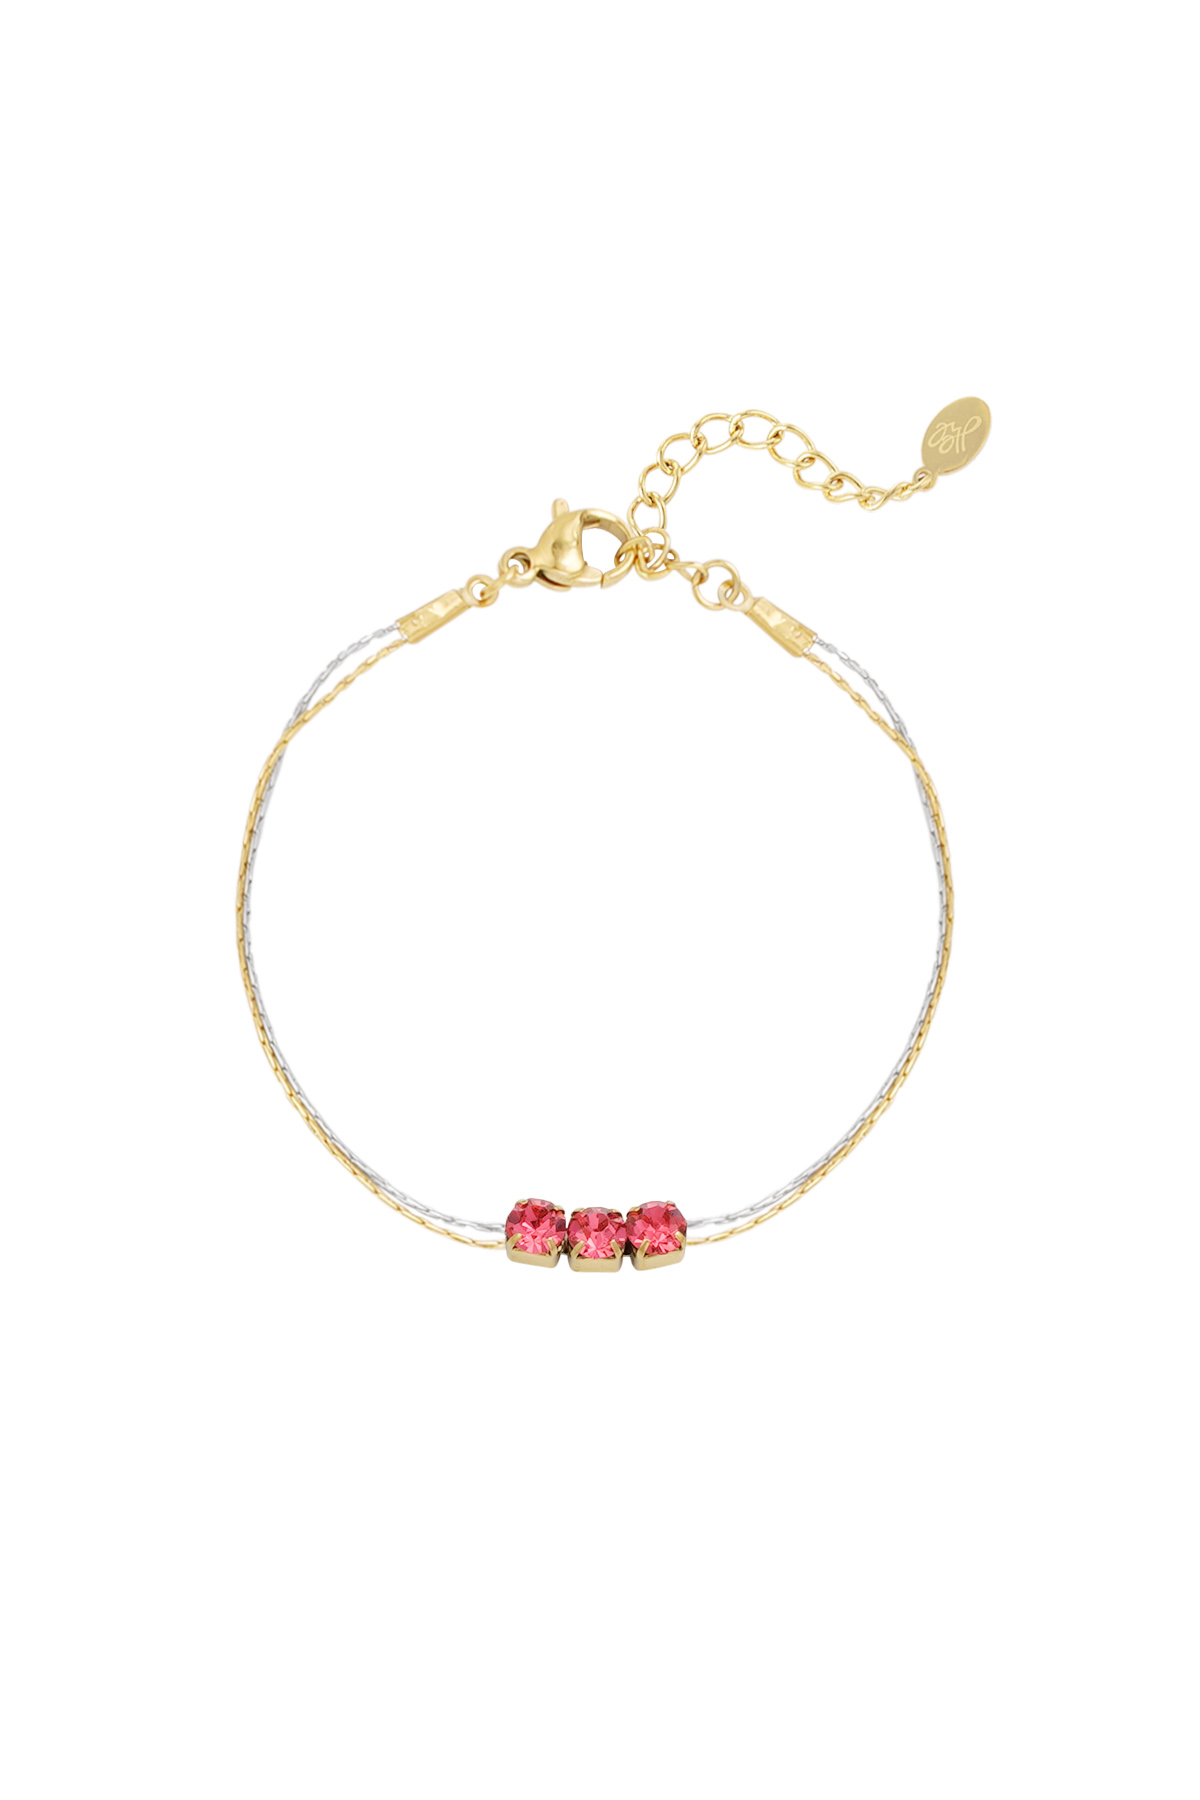 Bracelet gold/silver with stone - pink